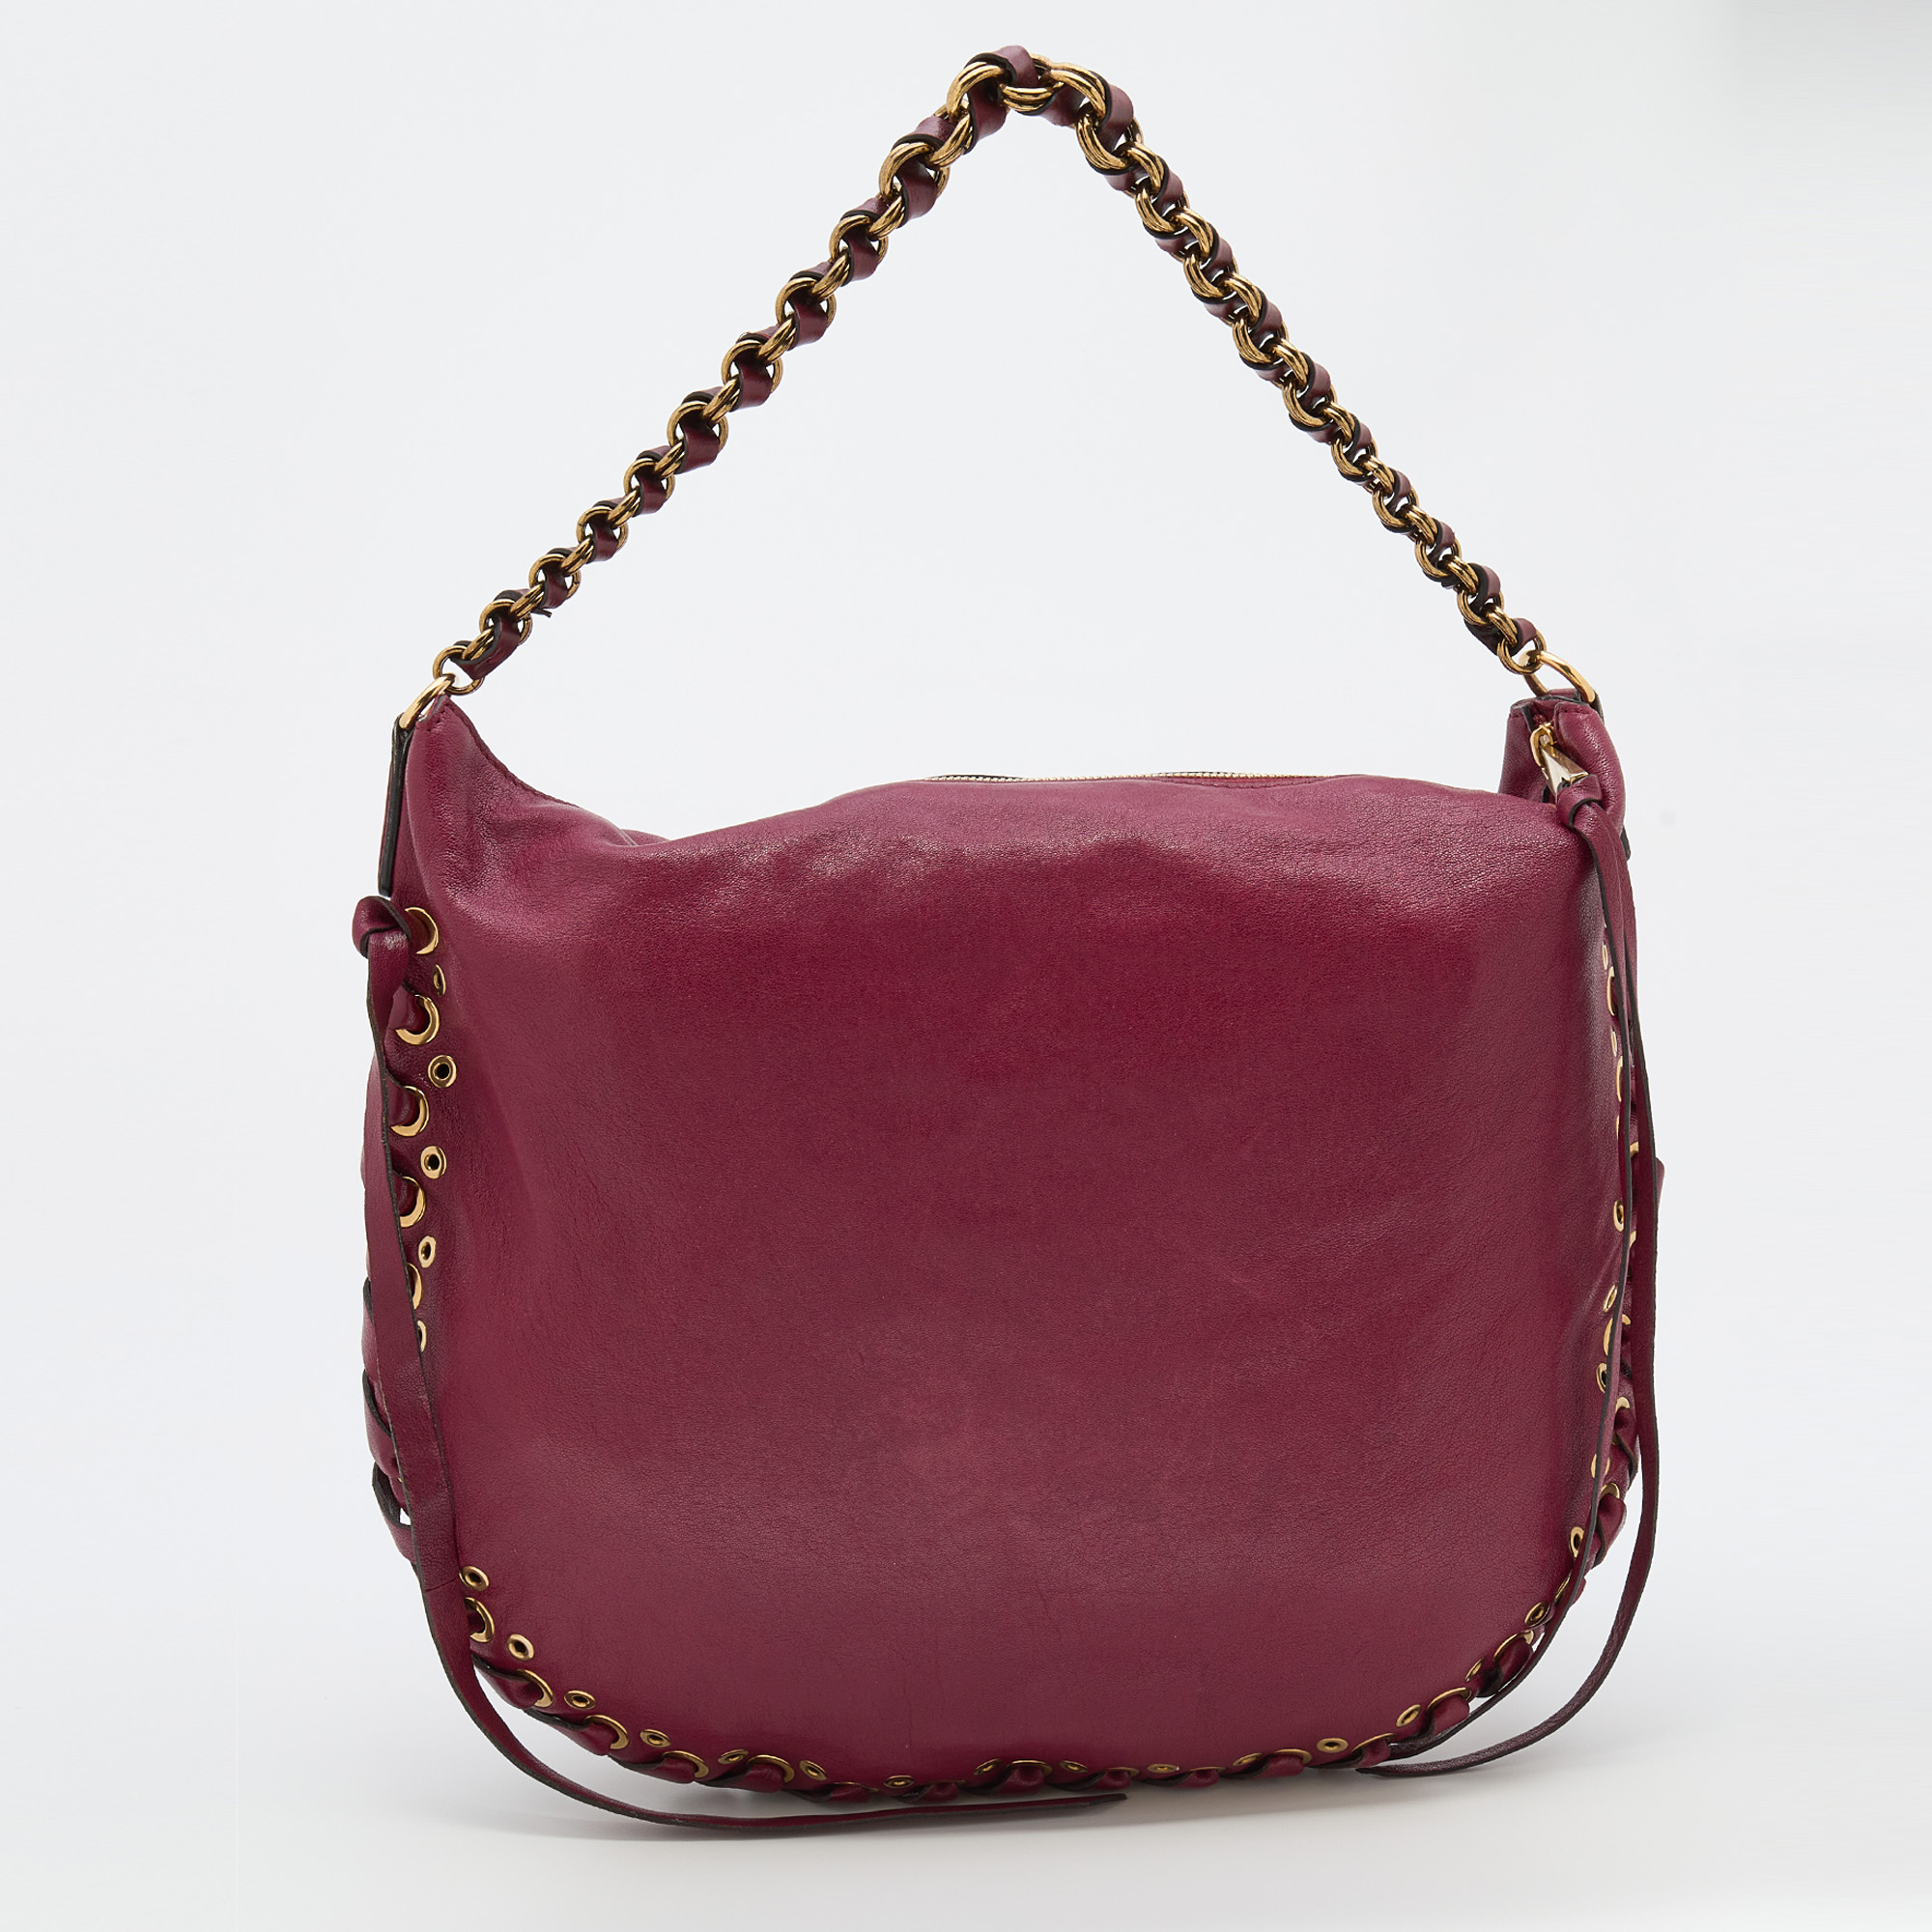 Marc Jacobs Burgundy Leather Lace Nomad Hobo